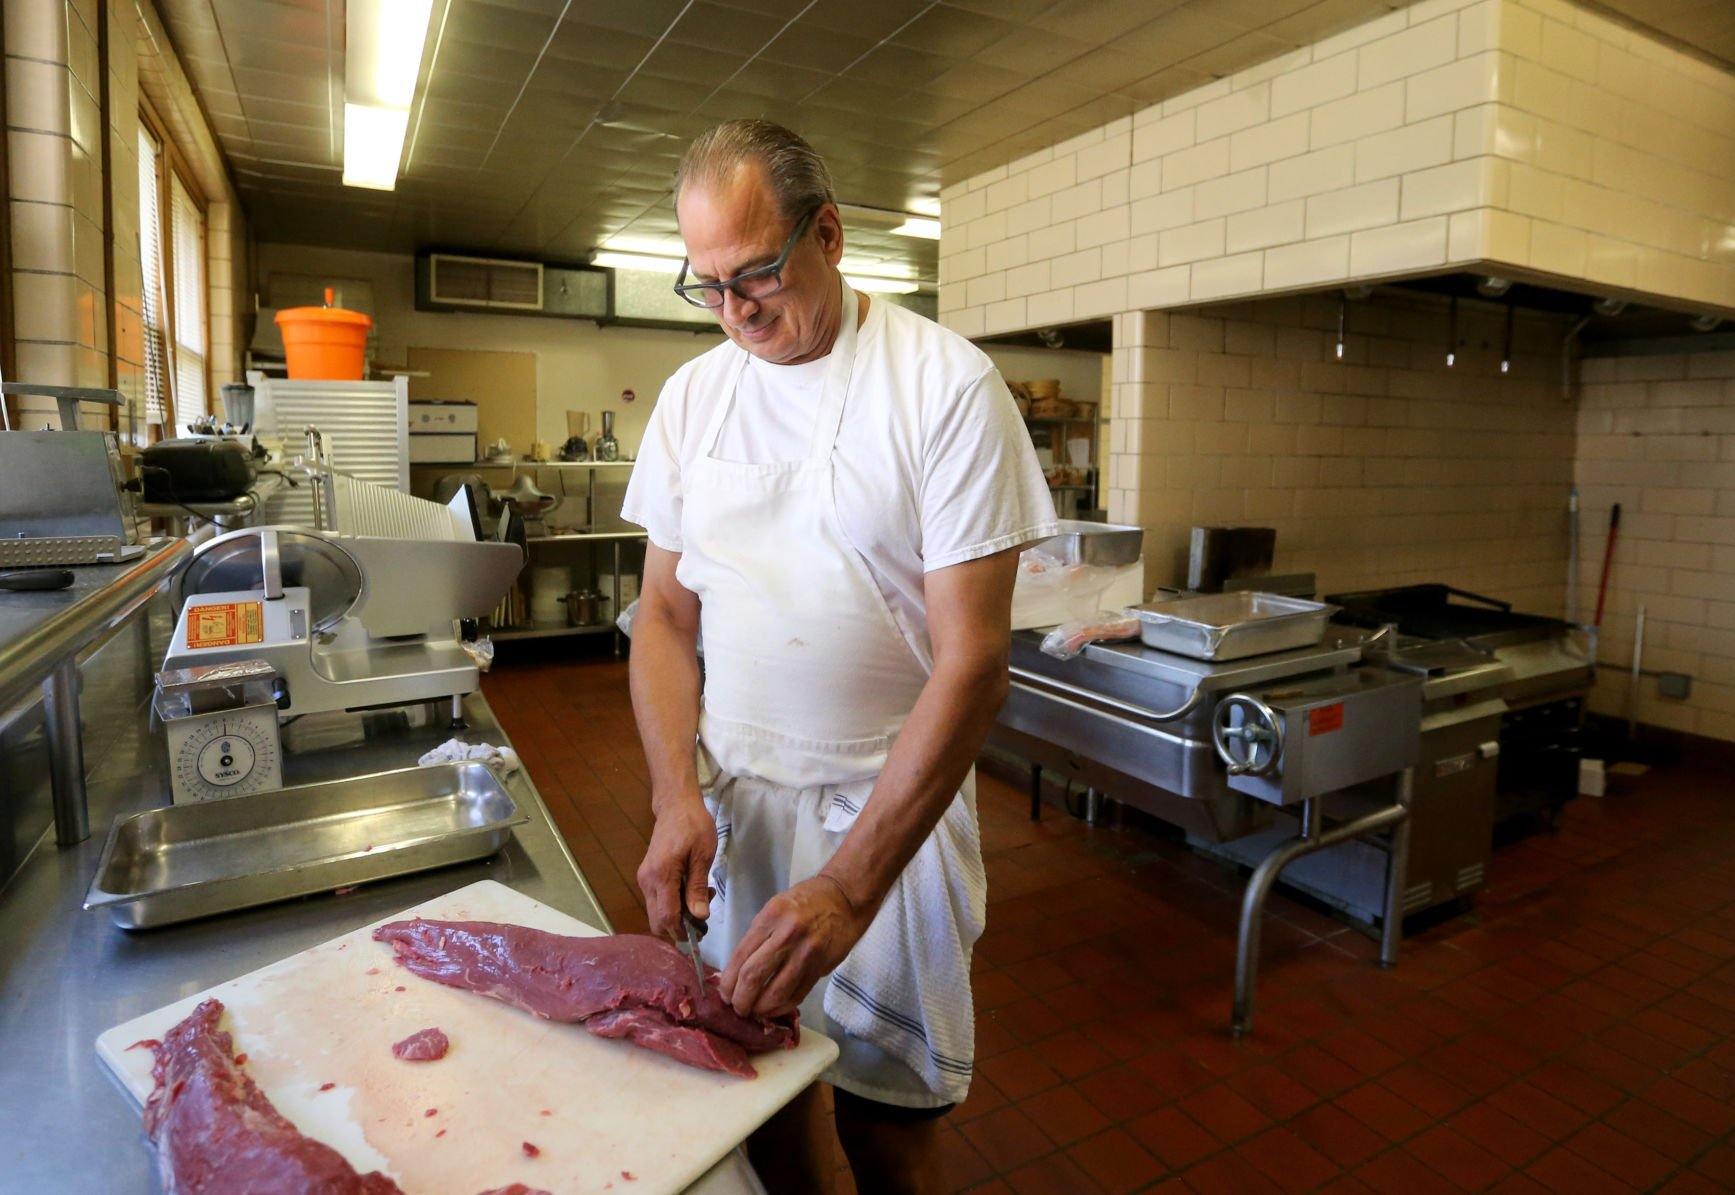 Craig Spielman cuts meat at Creative Catering in Dubuque on Thursday, Sept. 8, 2022.    PHOTO CREDIT: JESSICA REILLY